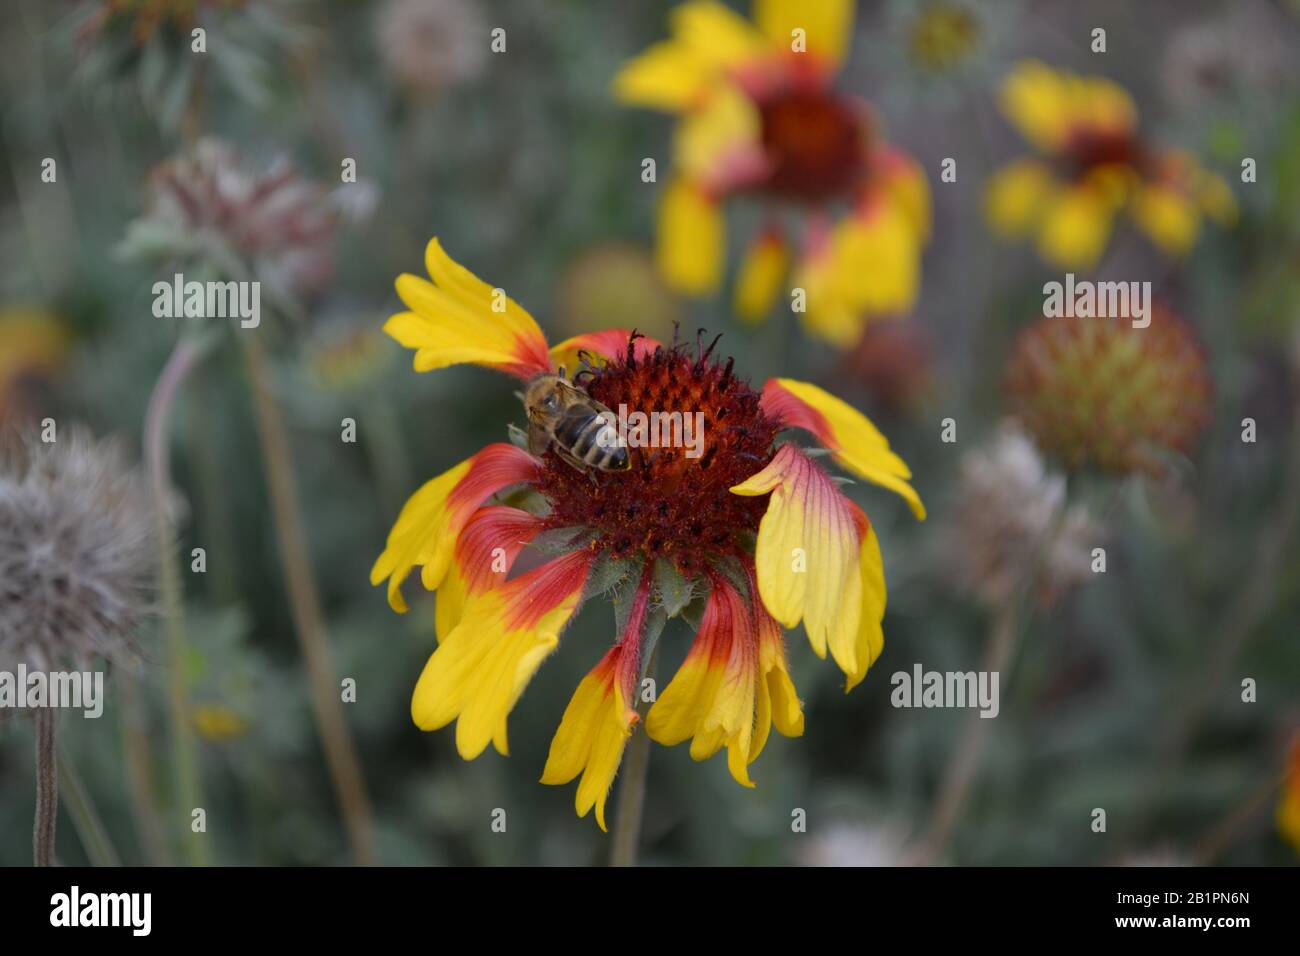 Gaillardia. G. hybrida Fanfare. A bee on a flower. Summer days. Flowerbed with flowers. Green leaves. Bright yellow flowers. Petals. Horizontal Stock Photo